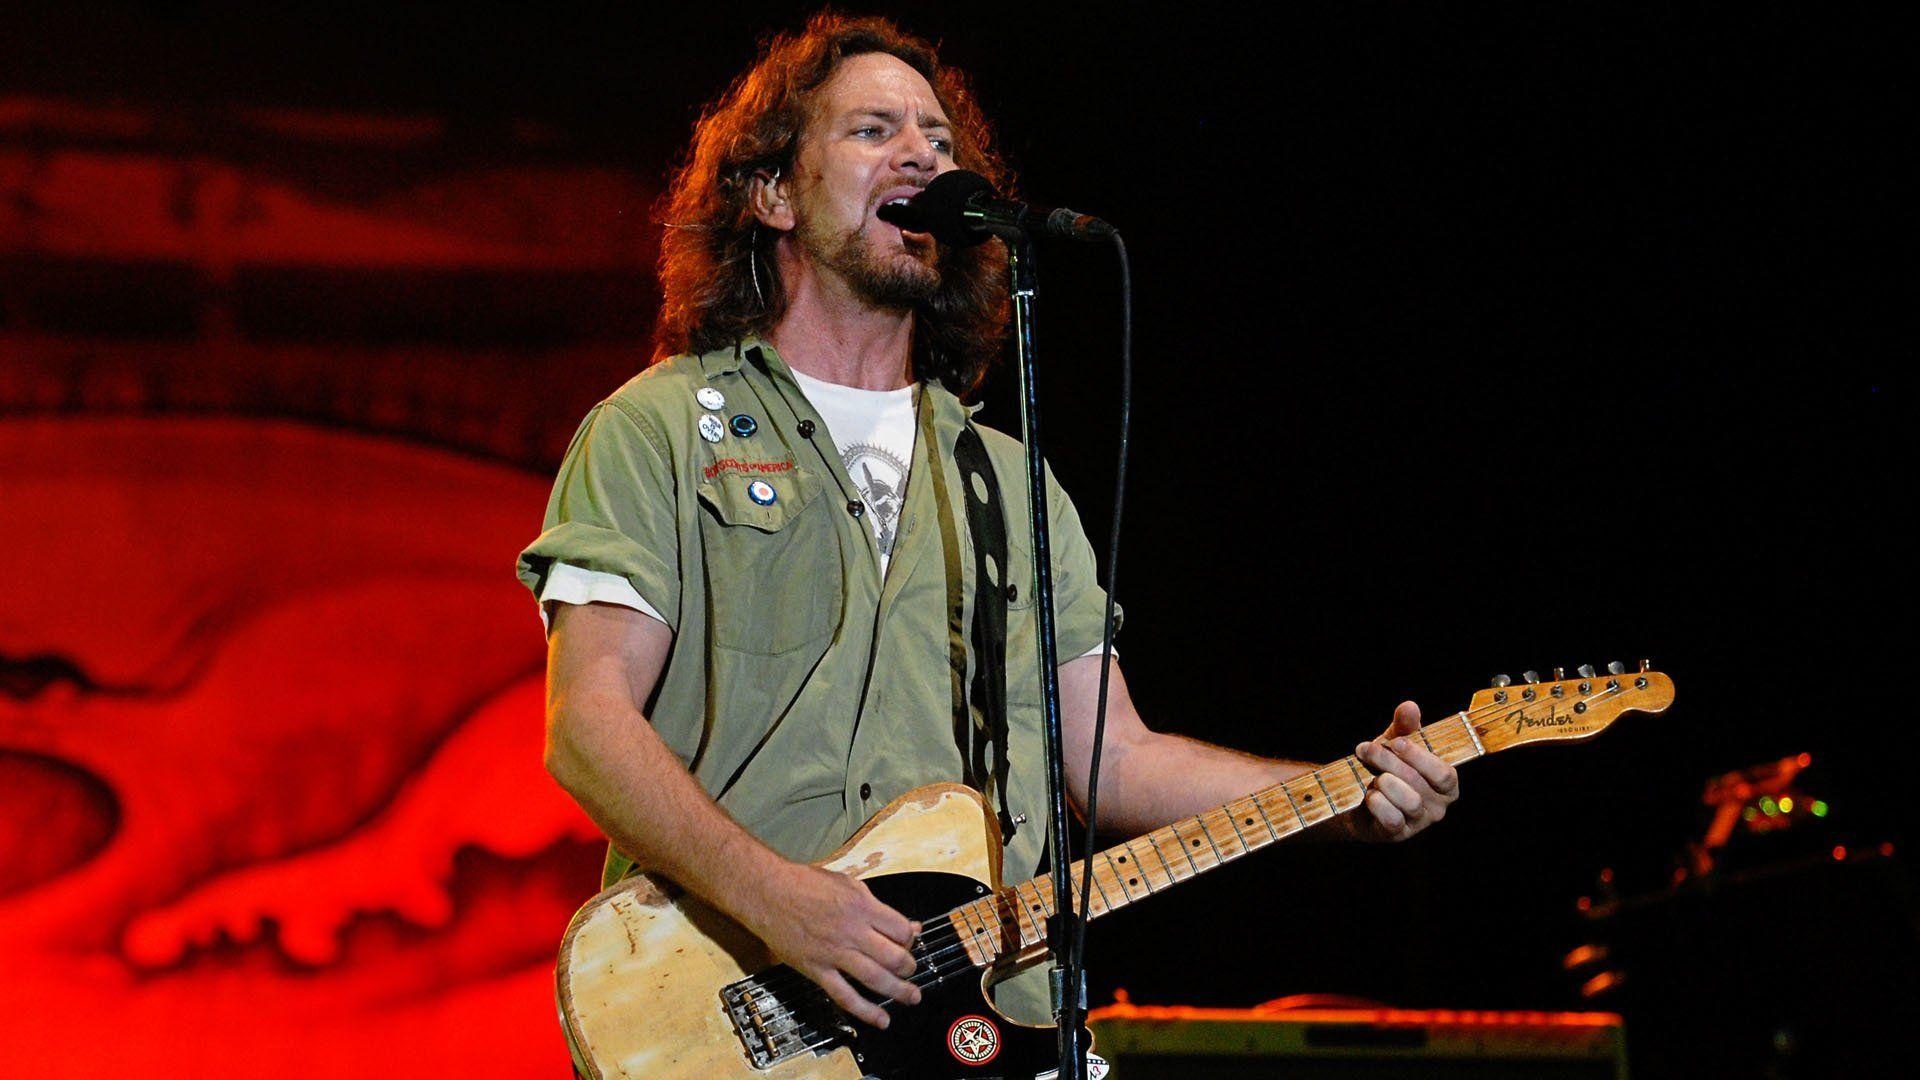 Eddie Vedder wallpapers, Fan creations, Devotion to the music, Reverence for the artist, 1920x1080 Full HD Desktop